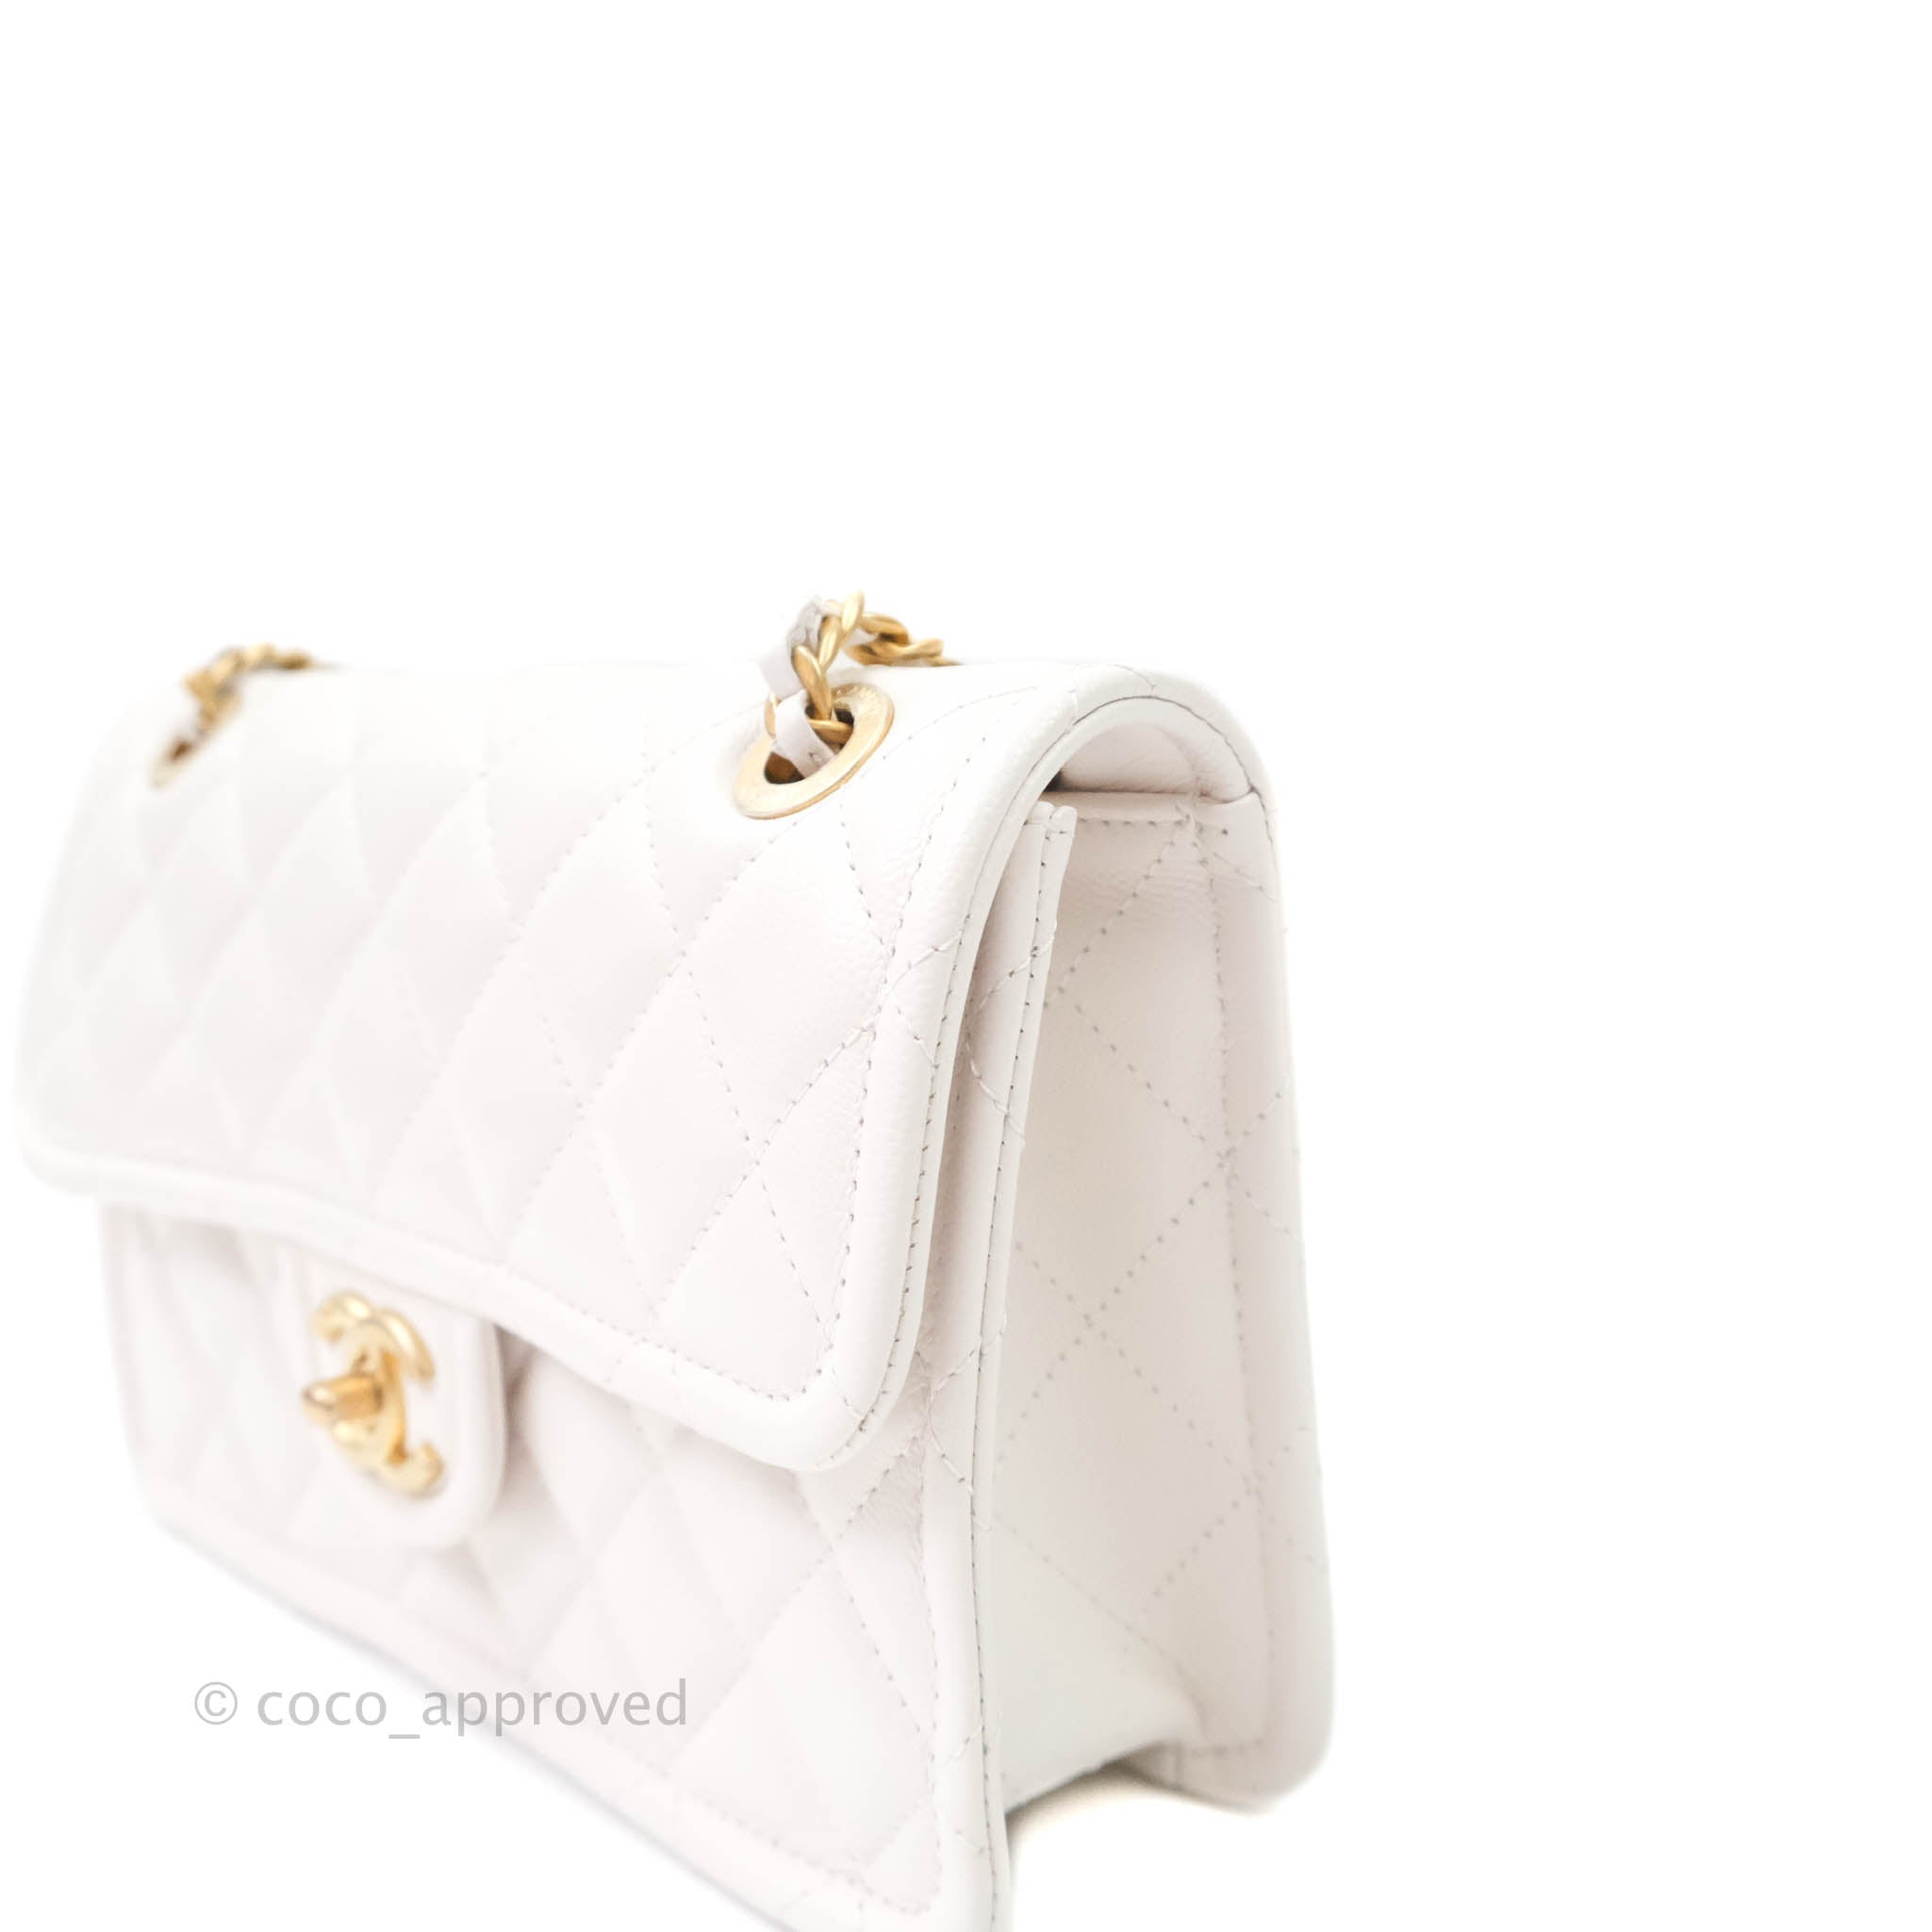 The Vanity Case Is Back For #CHANELMetiersdArt - BAGAHOLICBOY